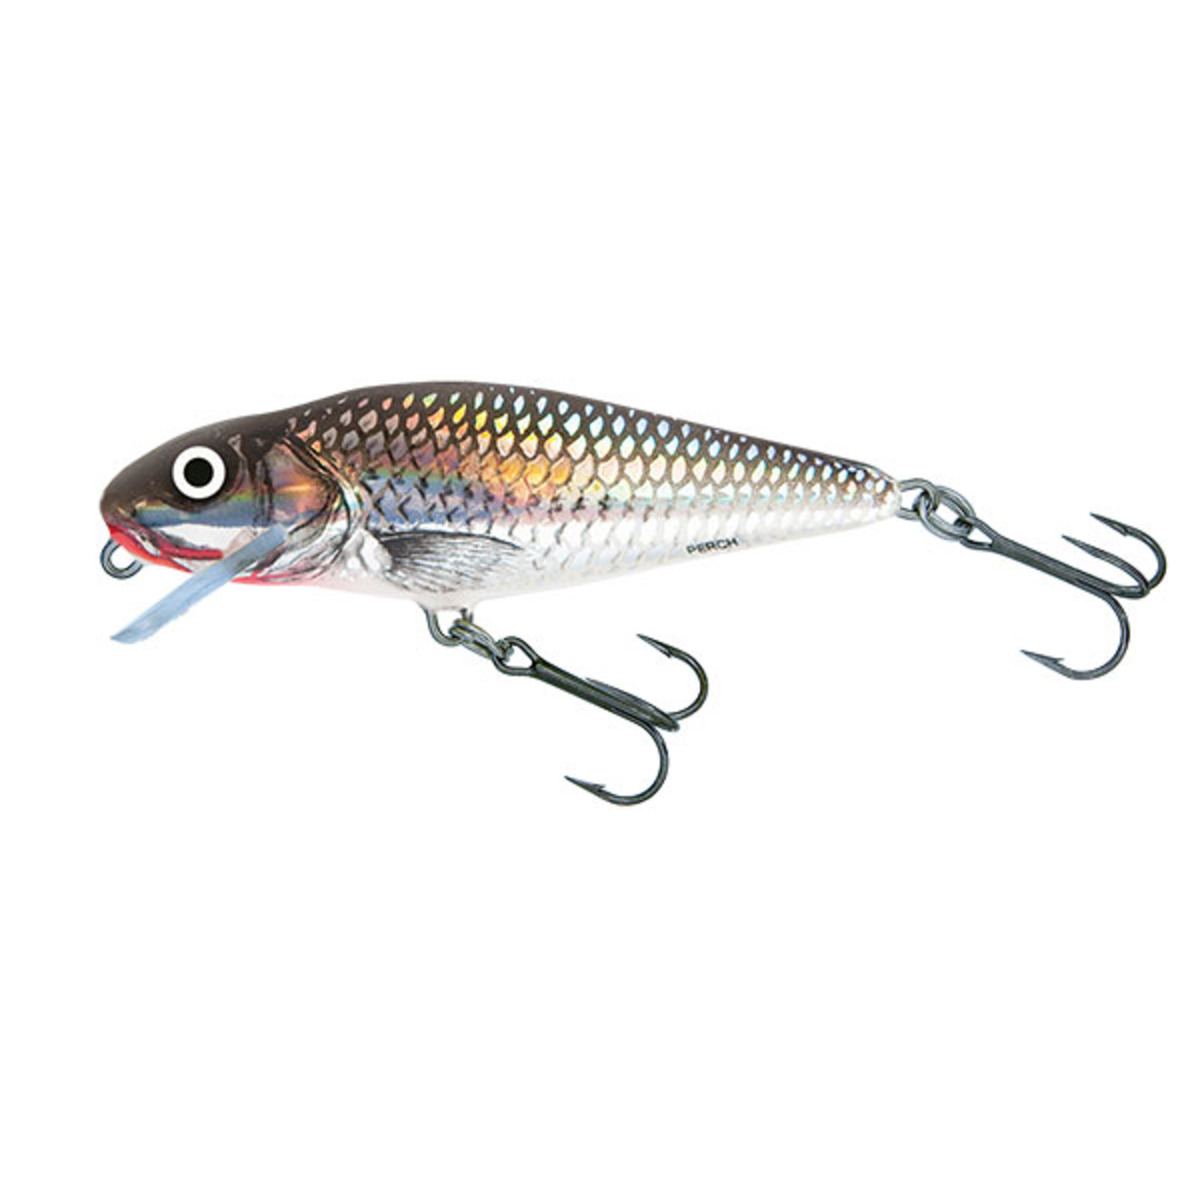 Salmo Perch Shallow Runner - 12 Cm - Holographic Grey Shiner